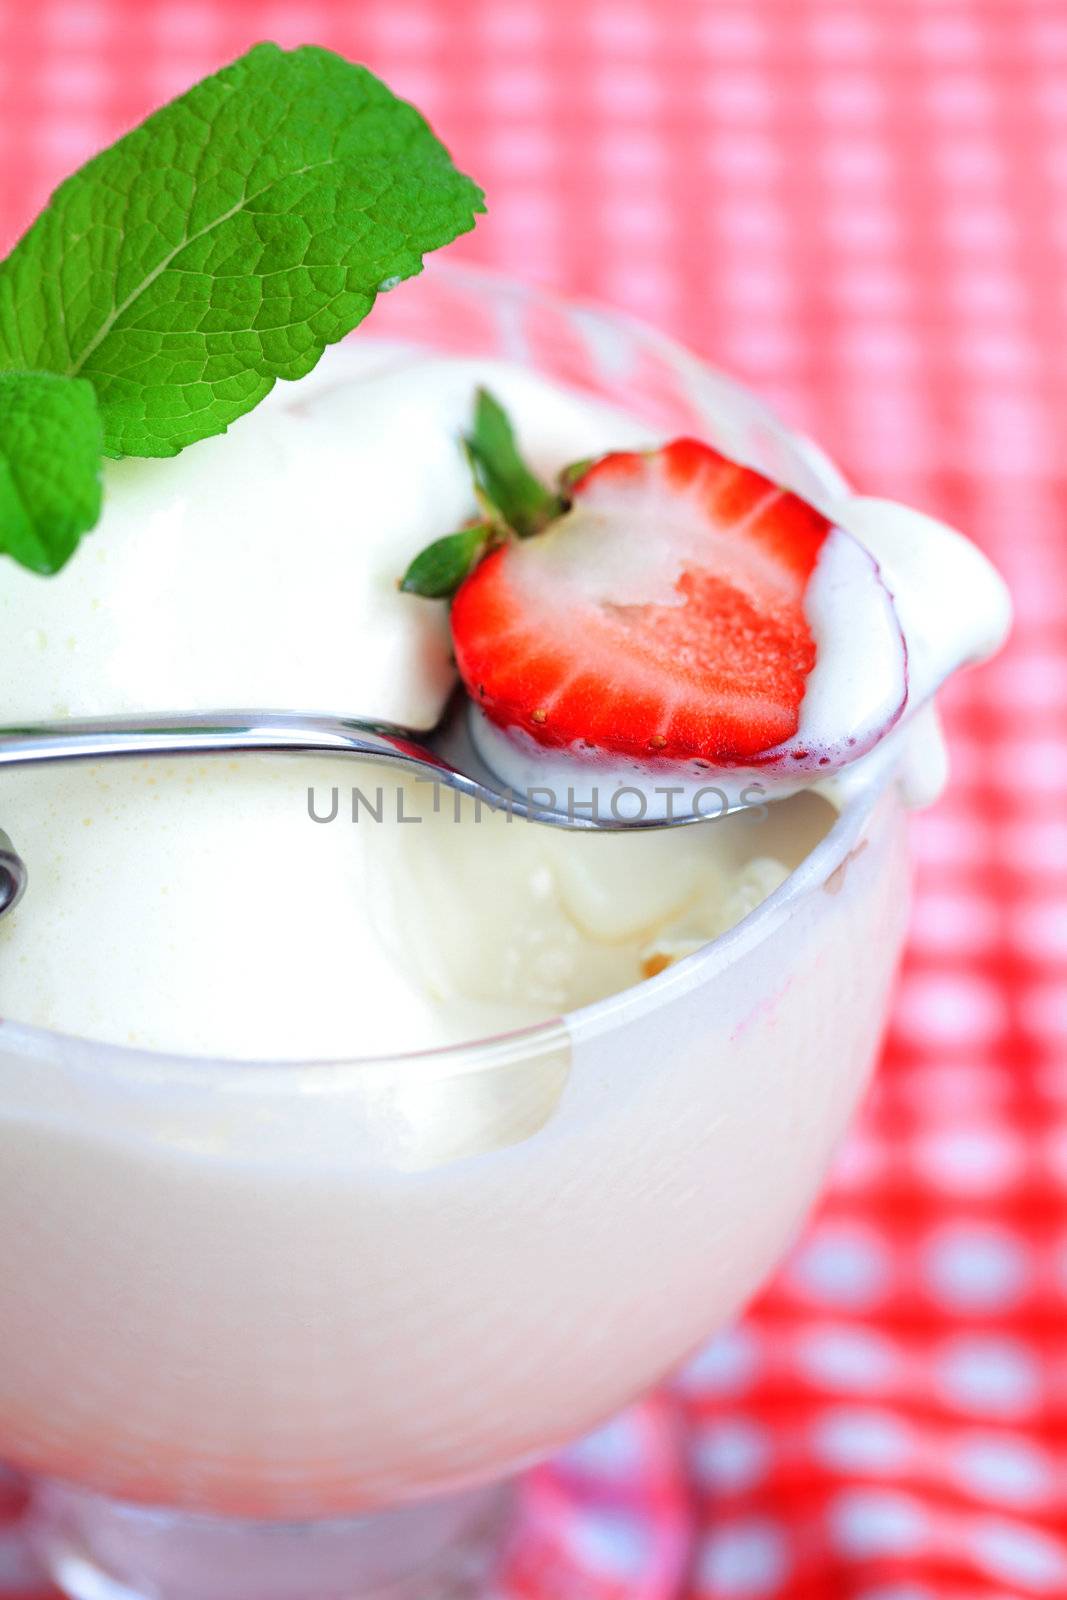 ice cream,strawberry with mint in a glass bowl on plaid fabric by jannyjus